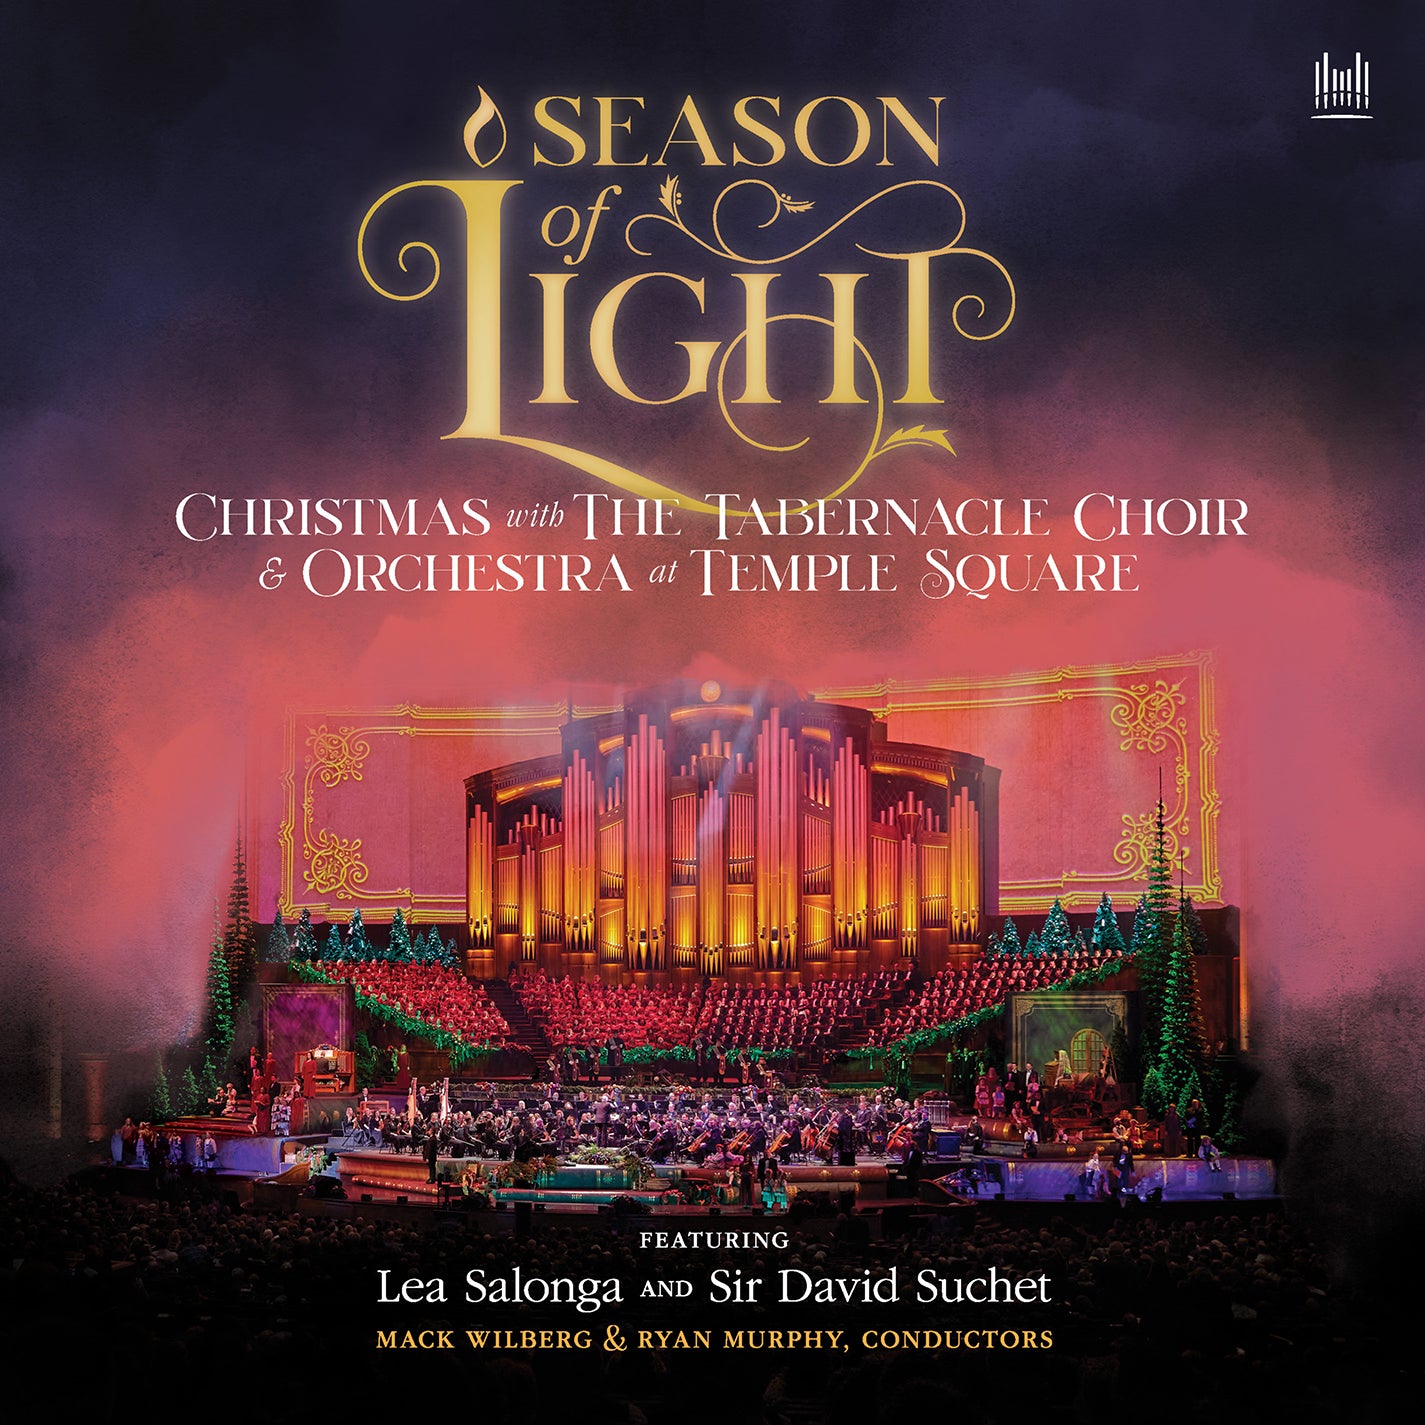 Season of Light - Christmas with The Tabernacle Choir & Orchestra at Temple Square